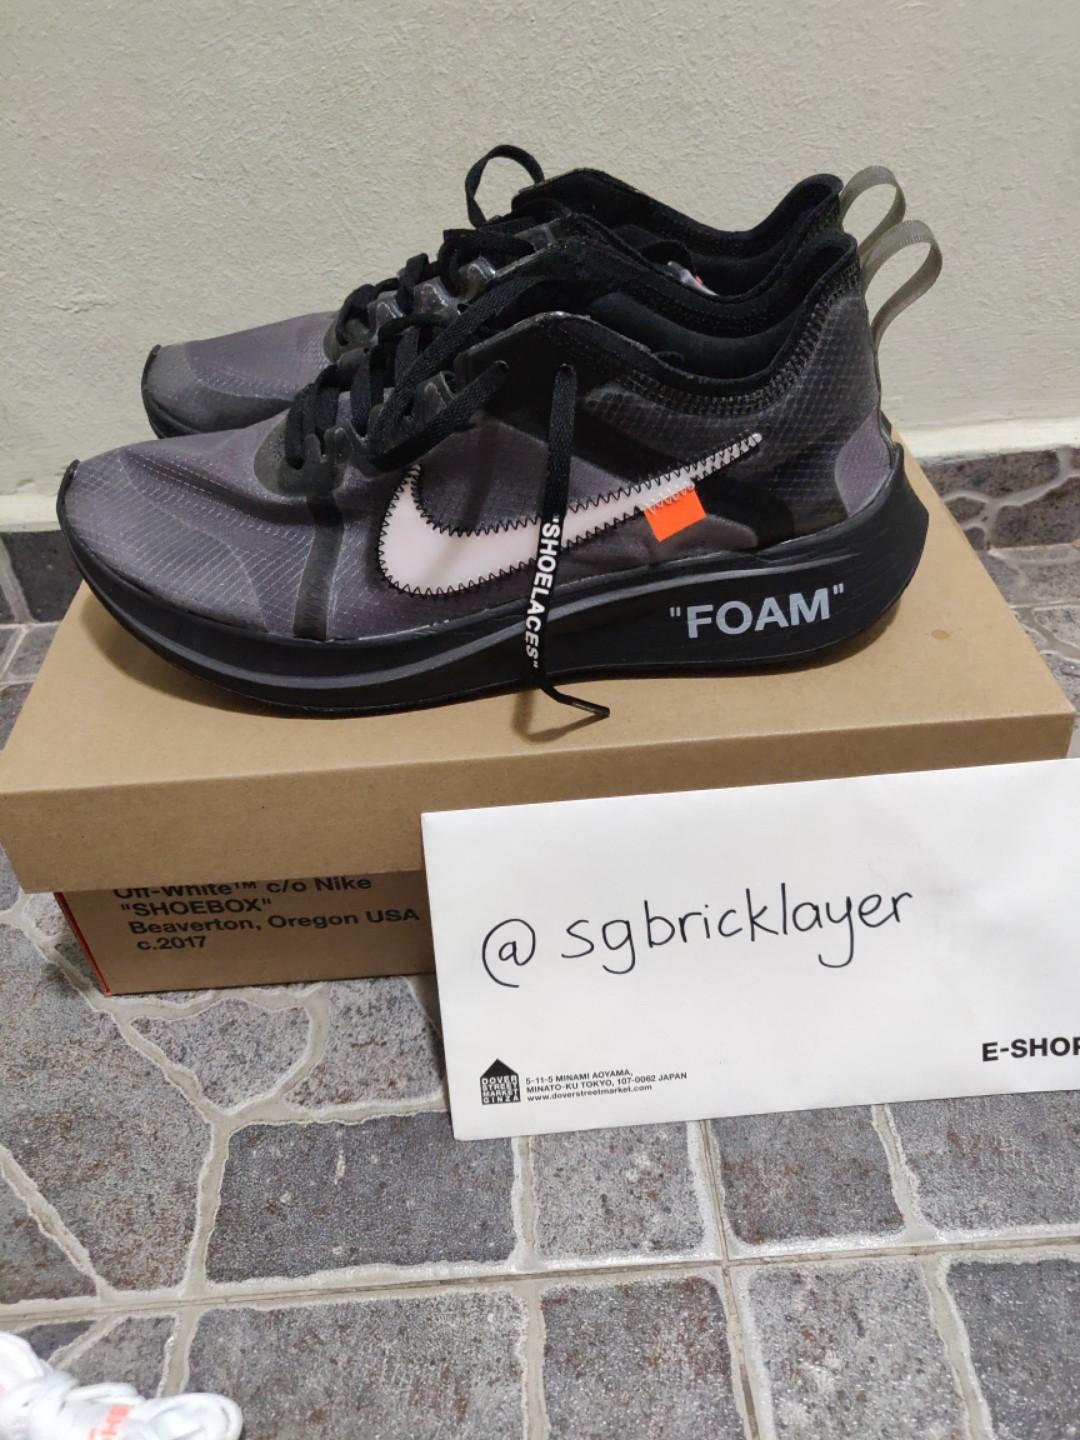 zoom fly ow black